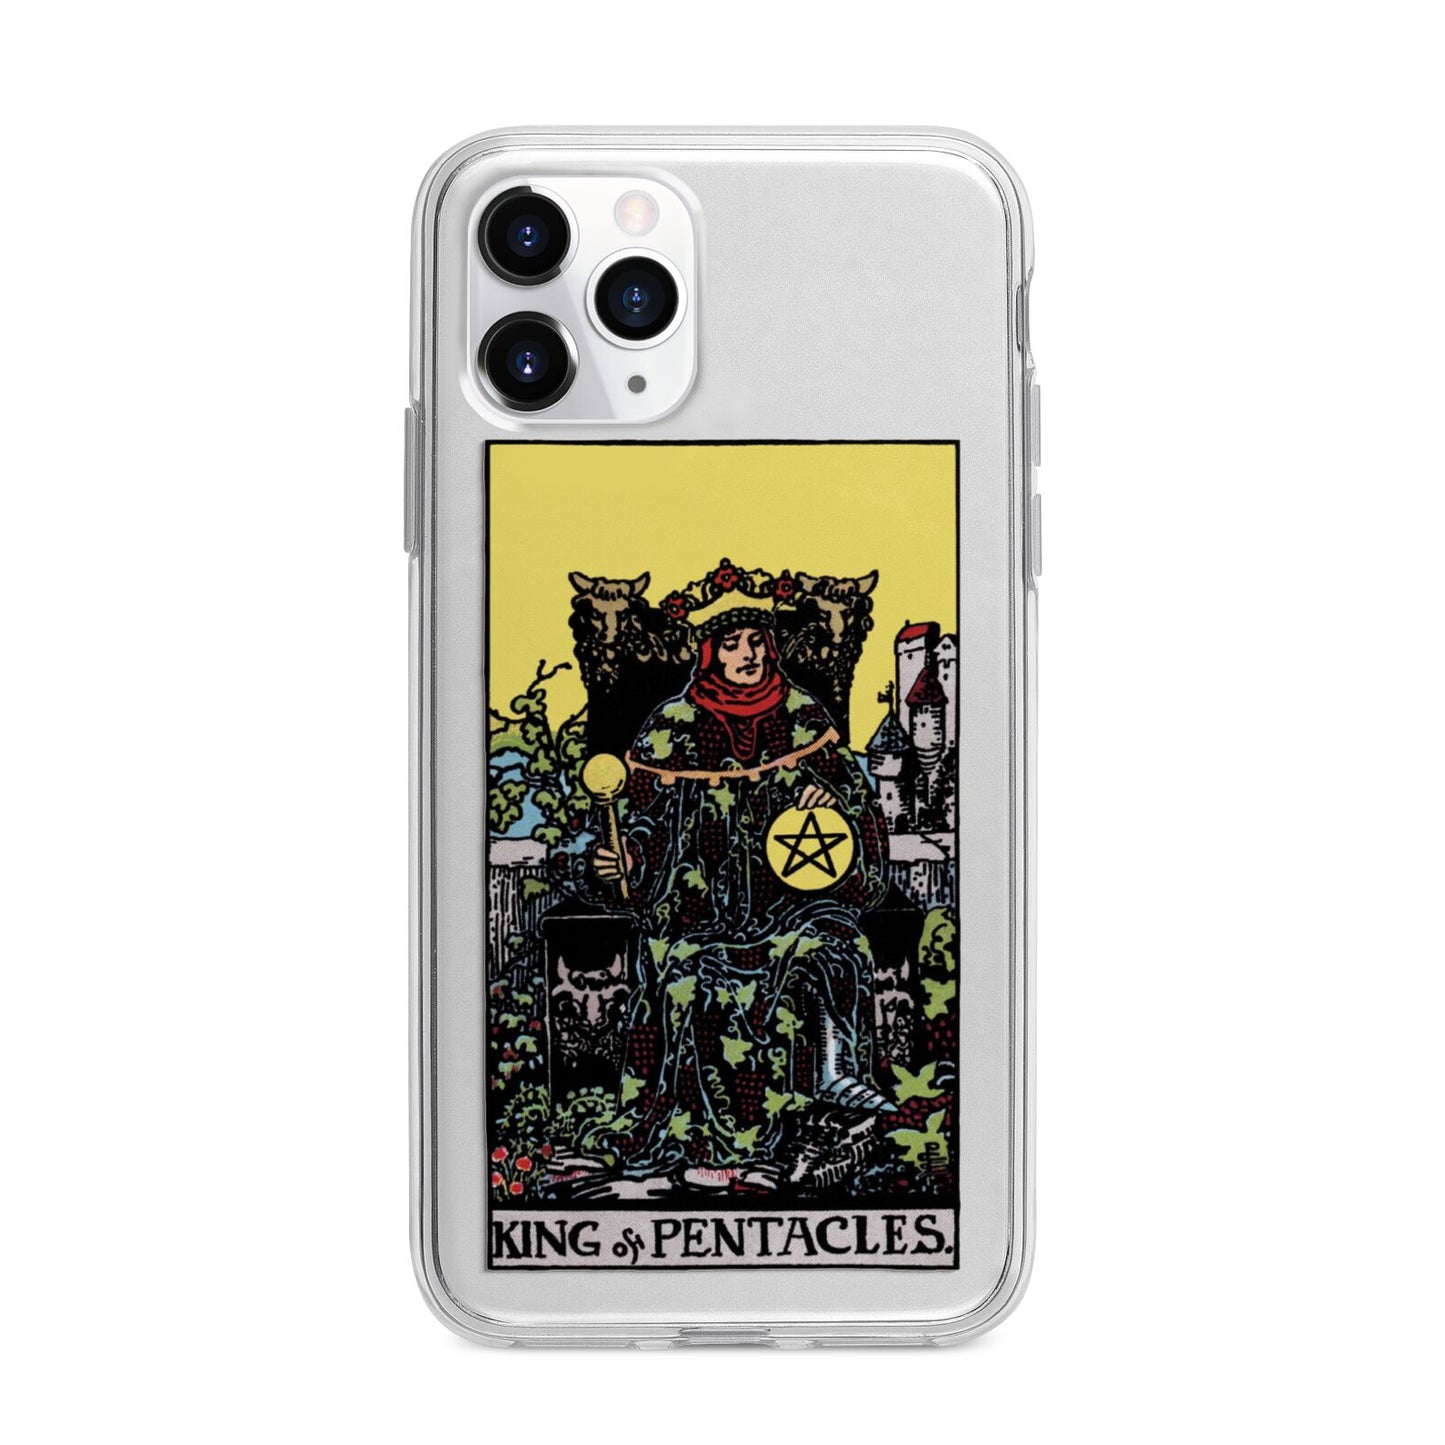 King of Pentacles Tarot Card Apple iPhone 11 Pro Max in Silver with Bumper Case